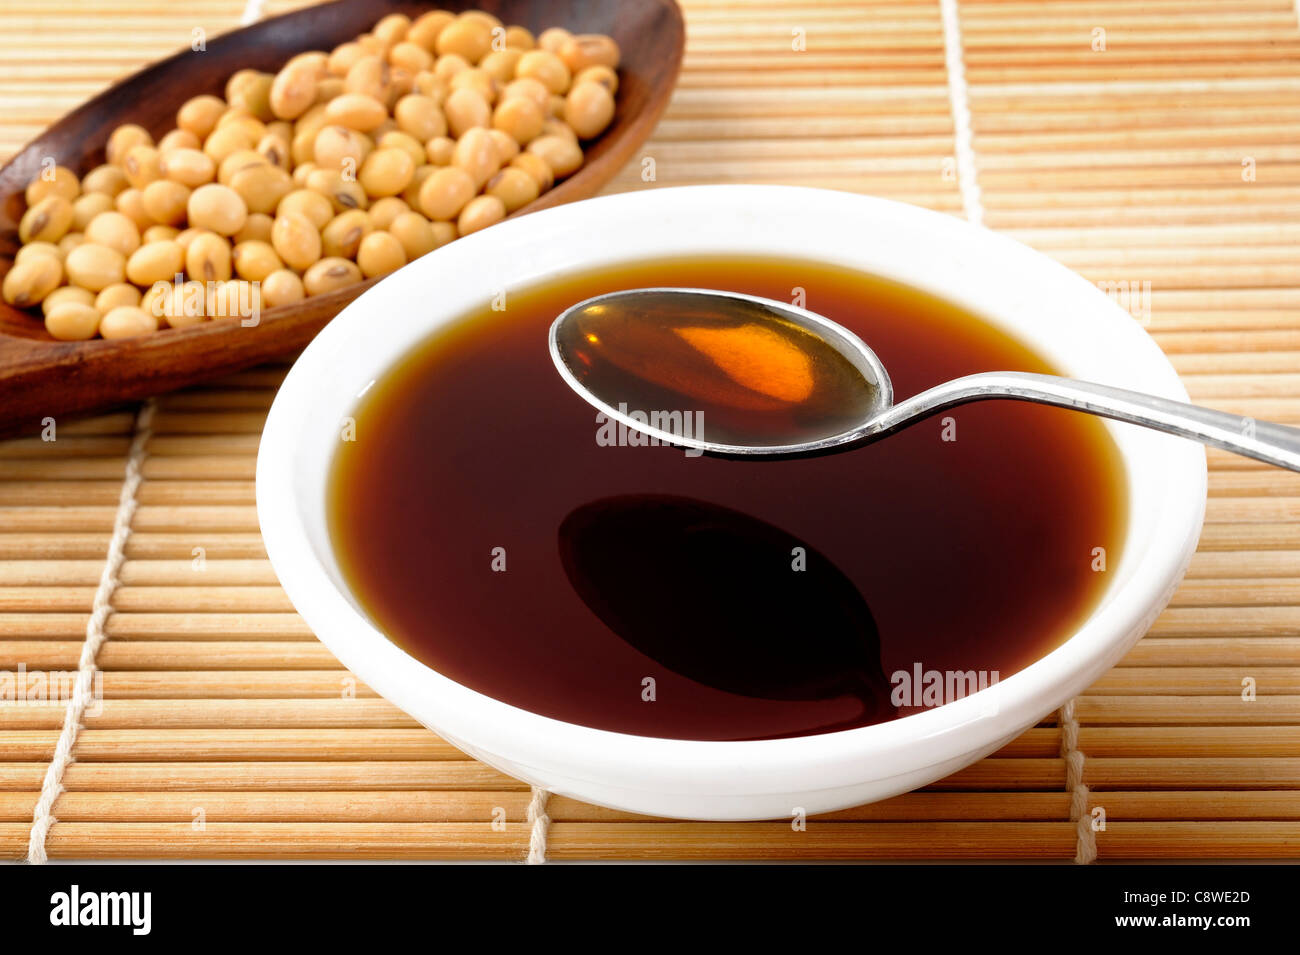 soy sauce and soybean Stock Photo